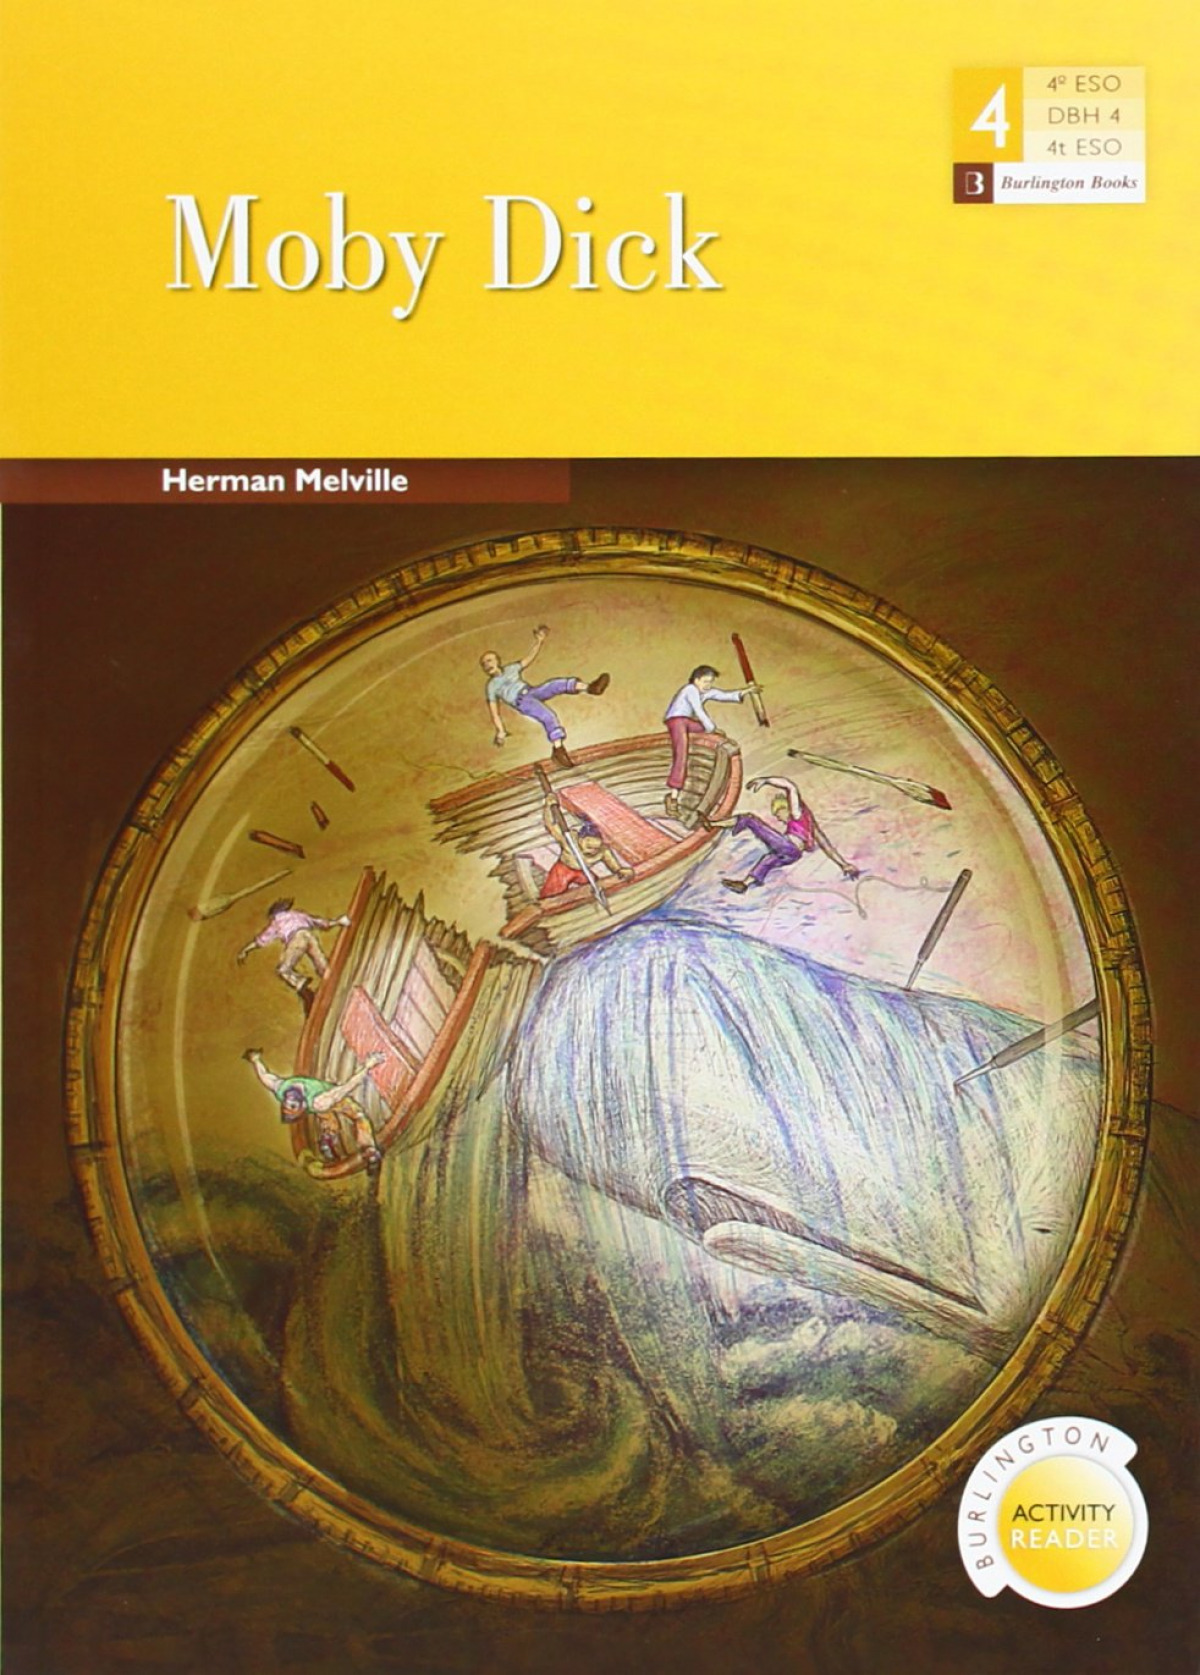 Moby dick - Melville Herman